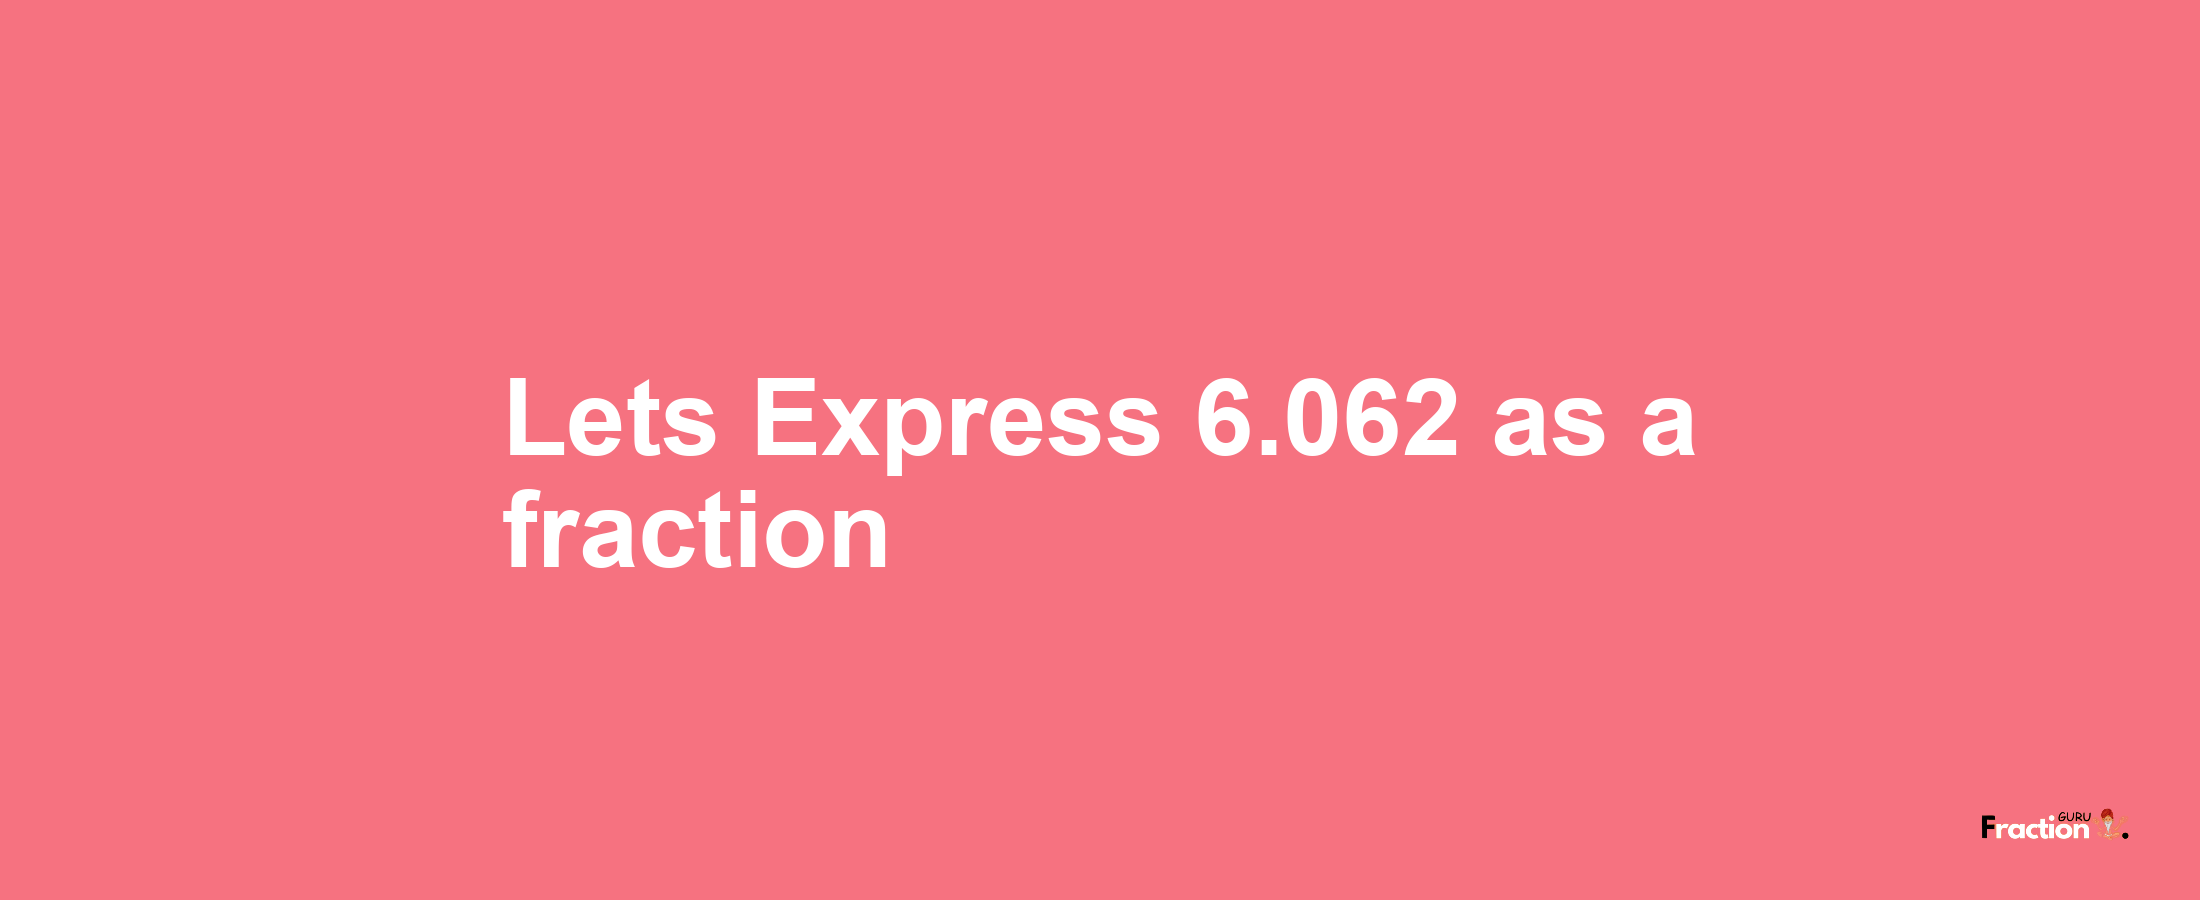 Lets Express 6.062 as afraction